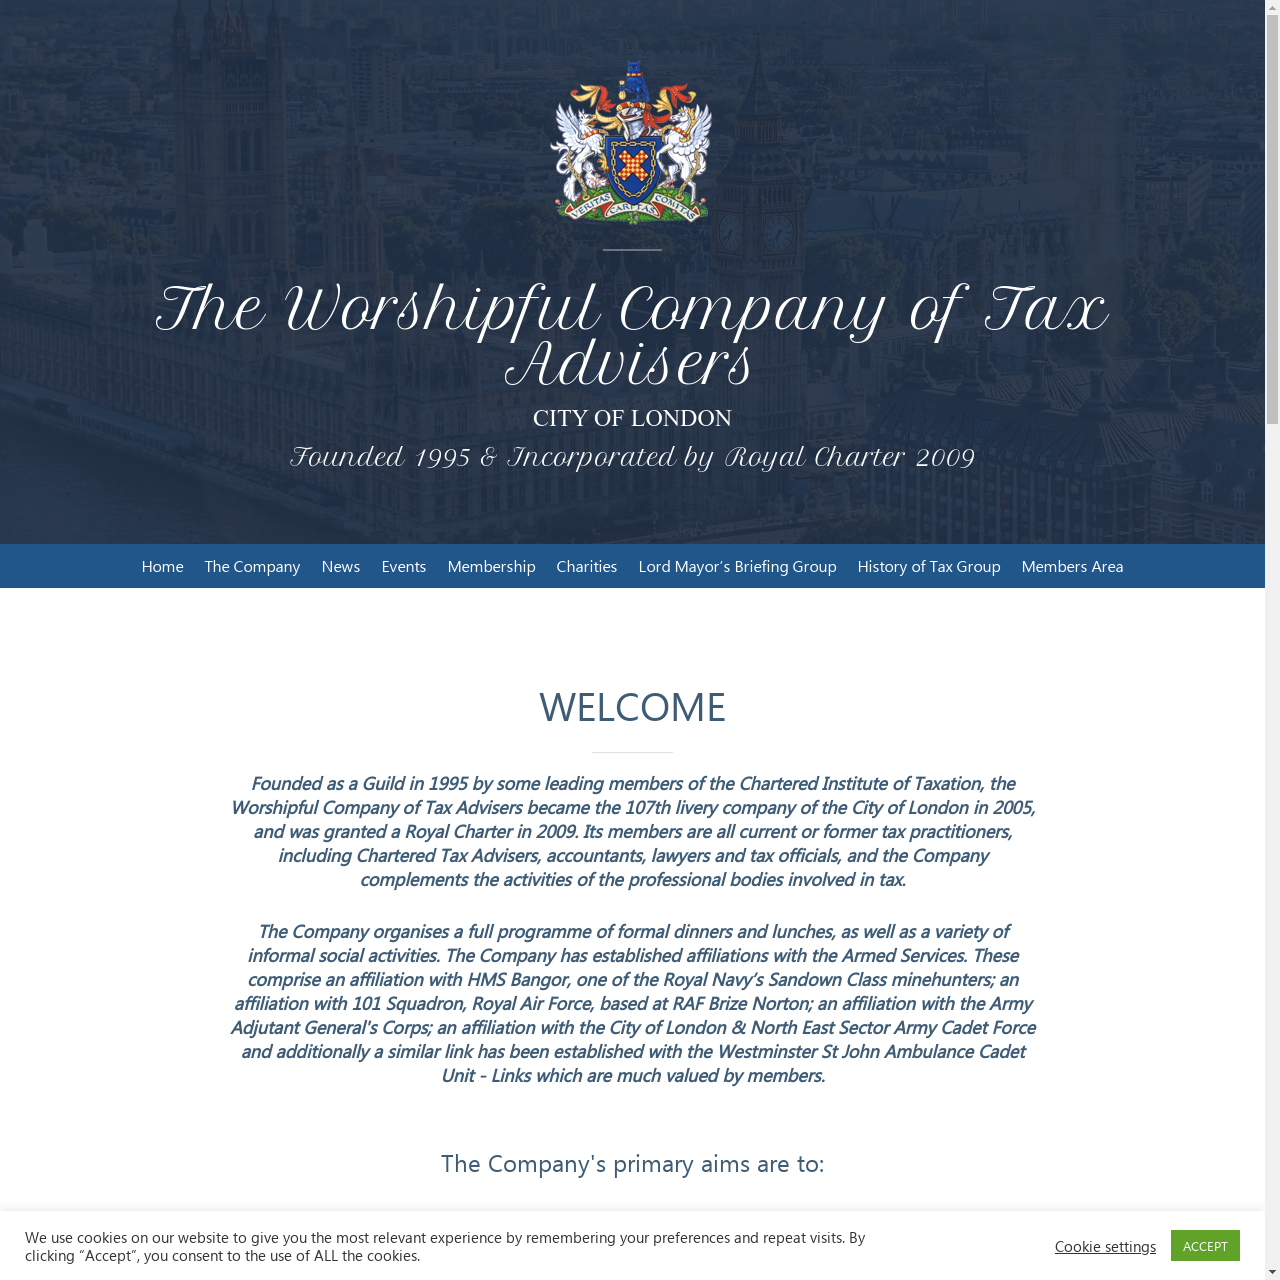 The Worshipful City of Tax Advisors website, designed and developed by MK Web.